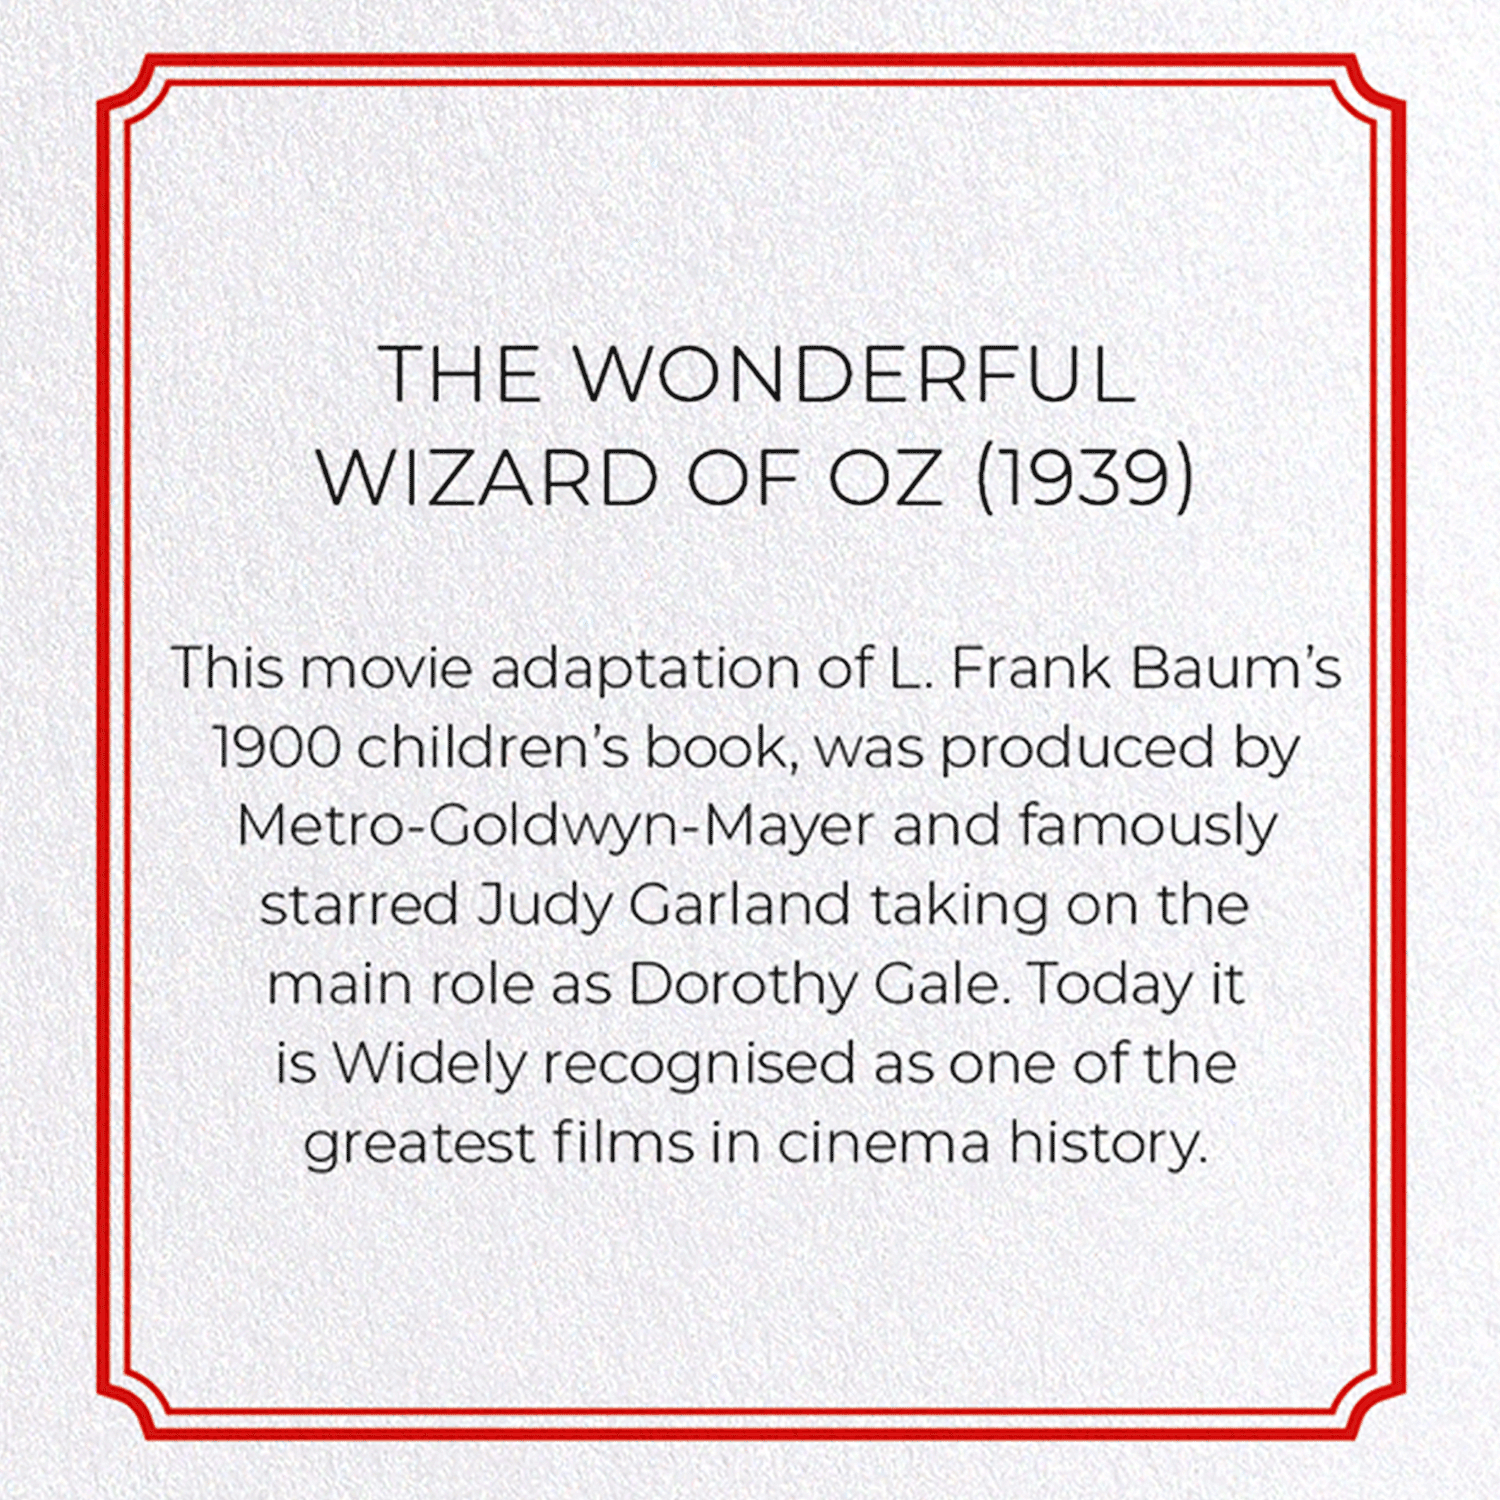 THE WONDERFUL WIZARD OF OZ (1939): Poster Greeting Card